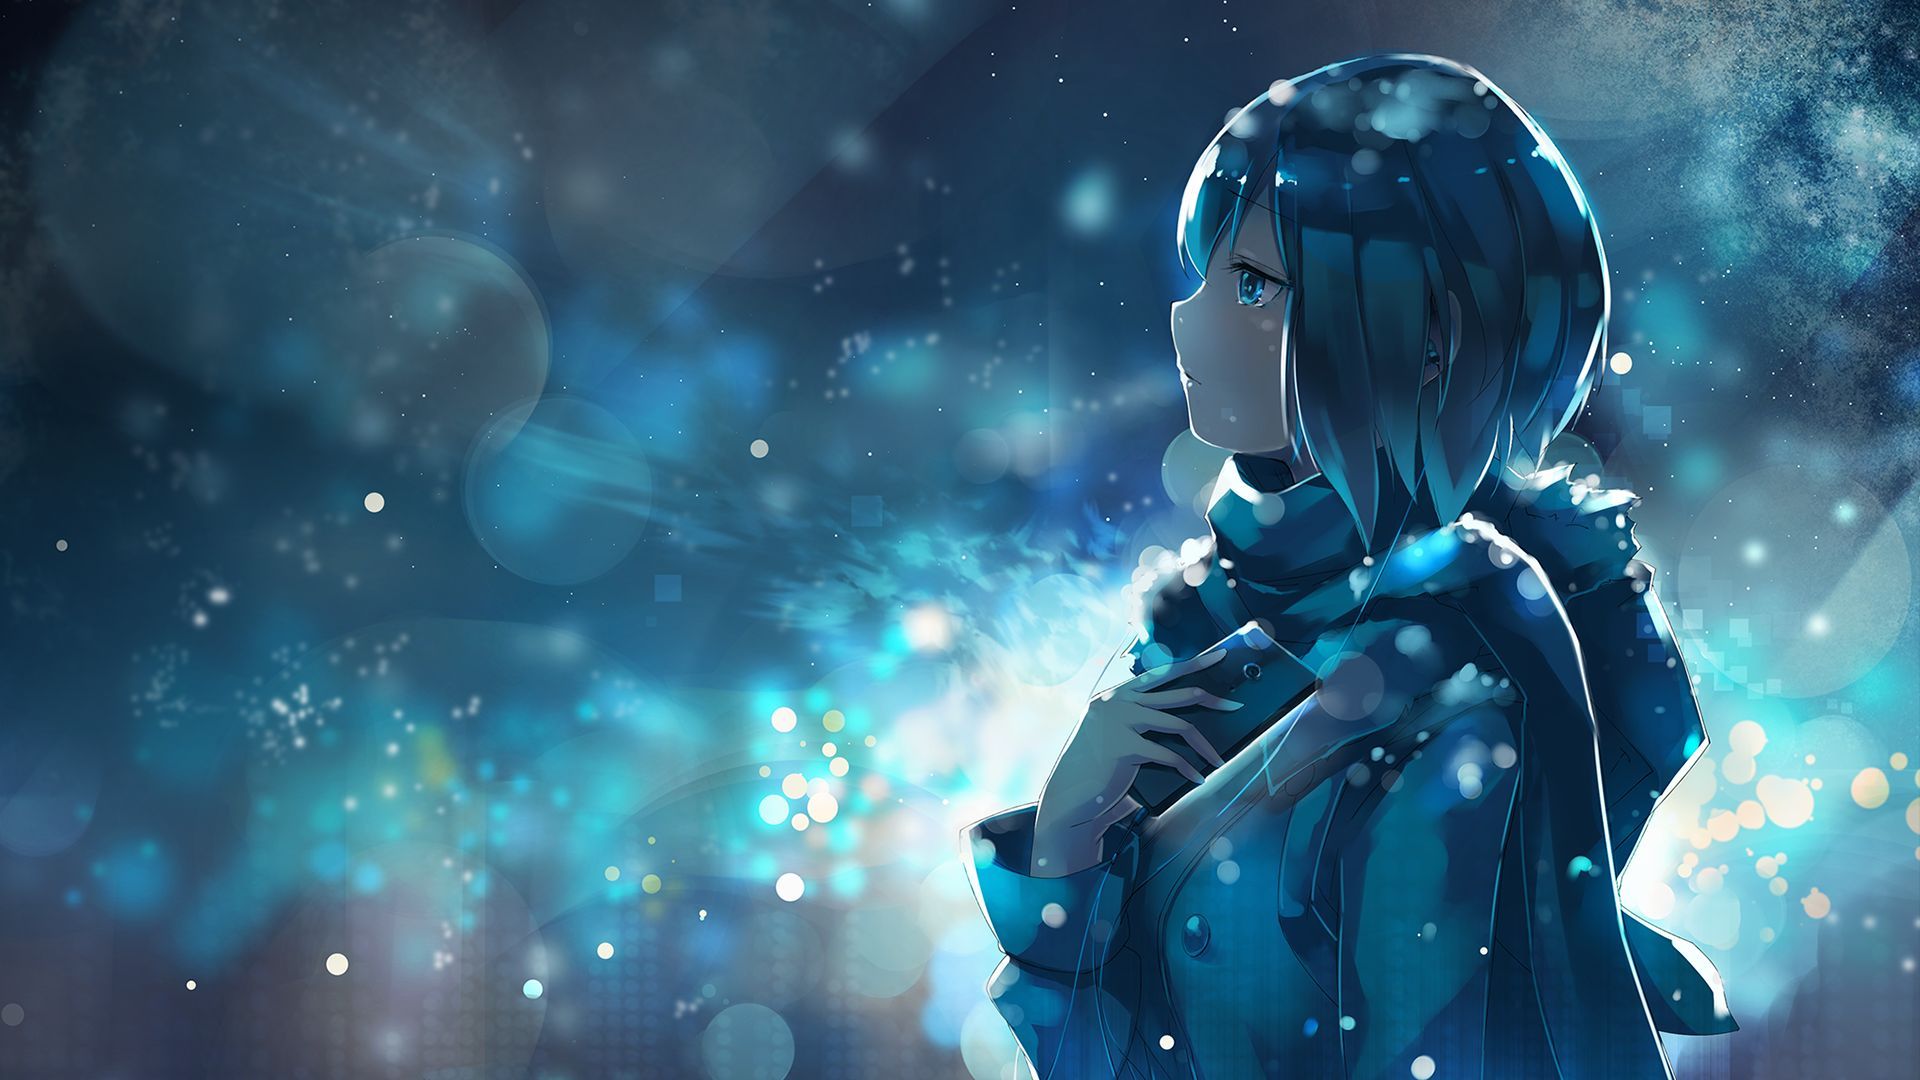 Nightcore Anime HD Wallpapers - Wallpaper Cave